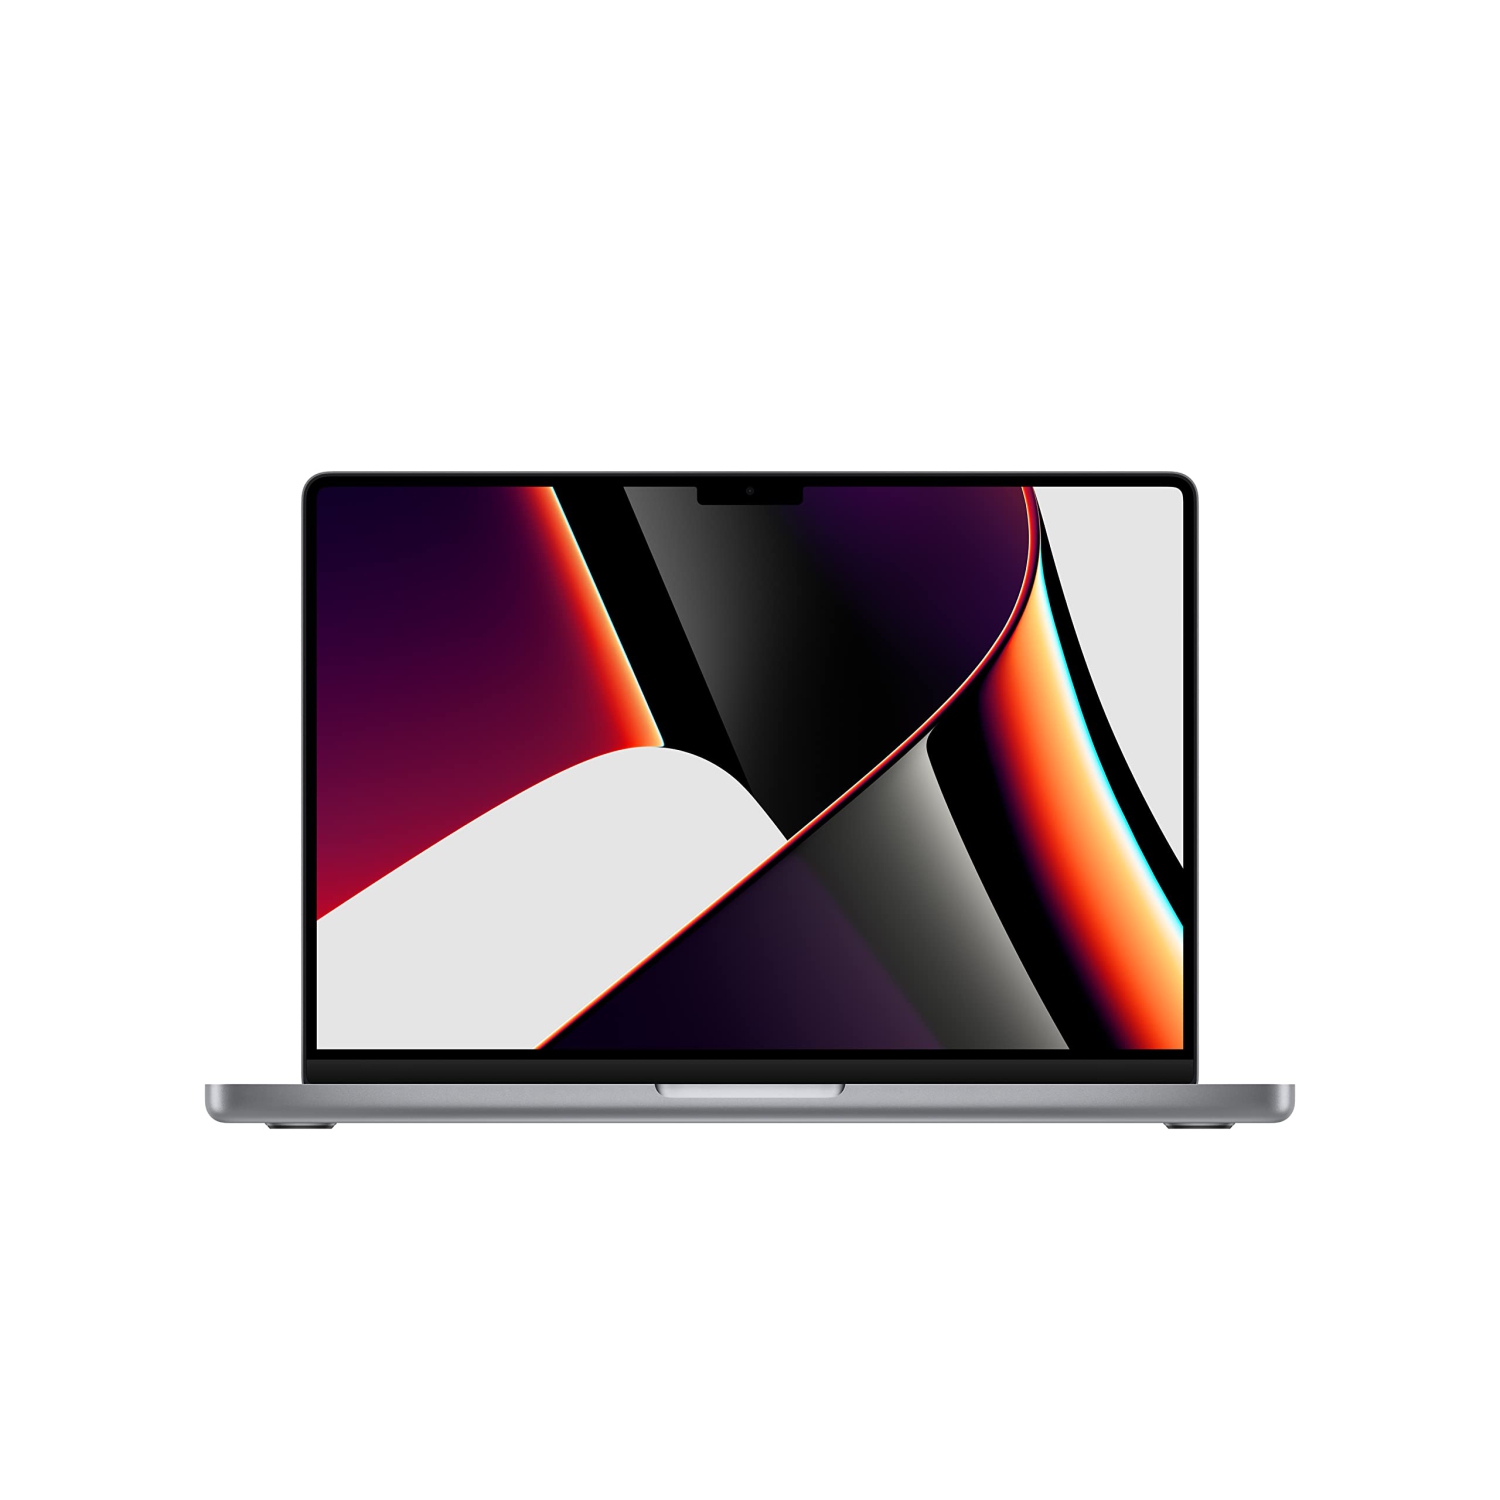 Refurbished (Excellent) - Apple MacBook Pro 14" w/ Touch ID (2021) - Space Gray (Apple M1 Pro Chip / 1TB SSD / 16GB RAM) - English